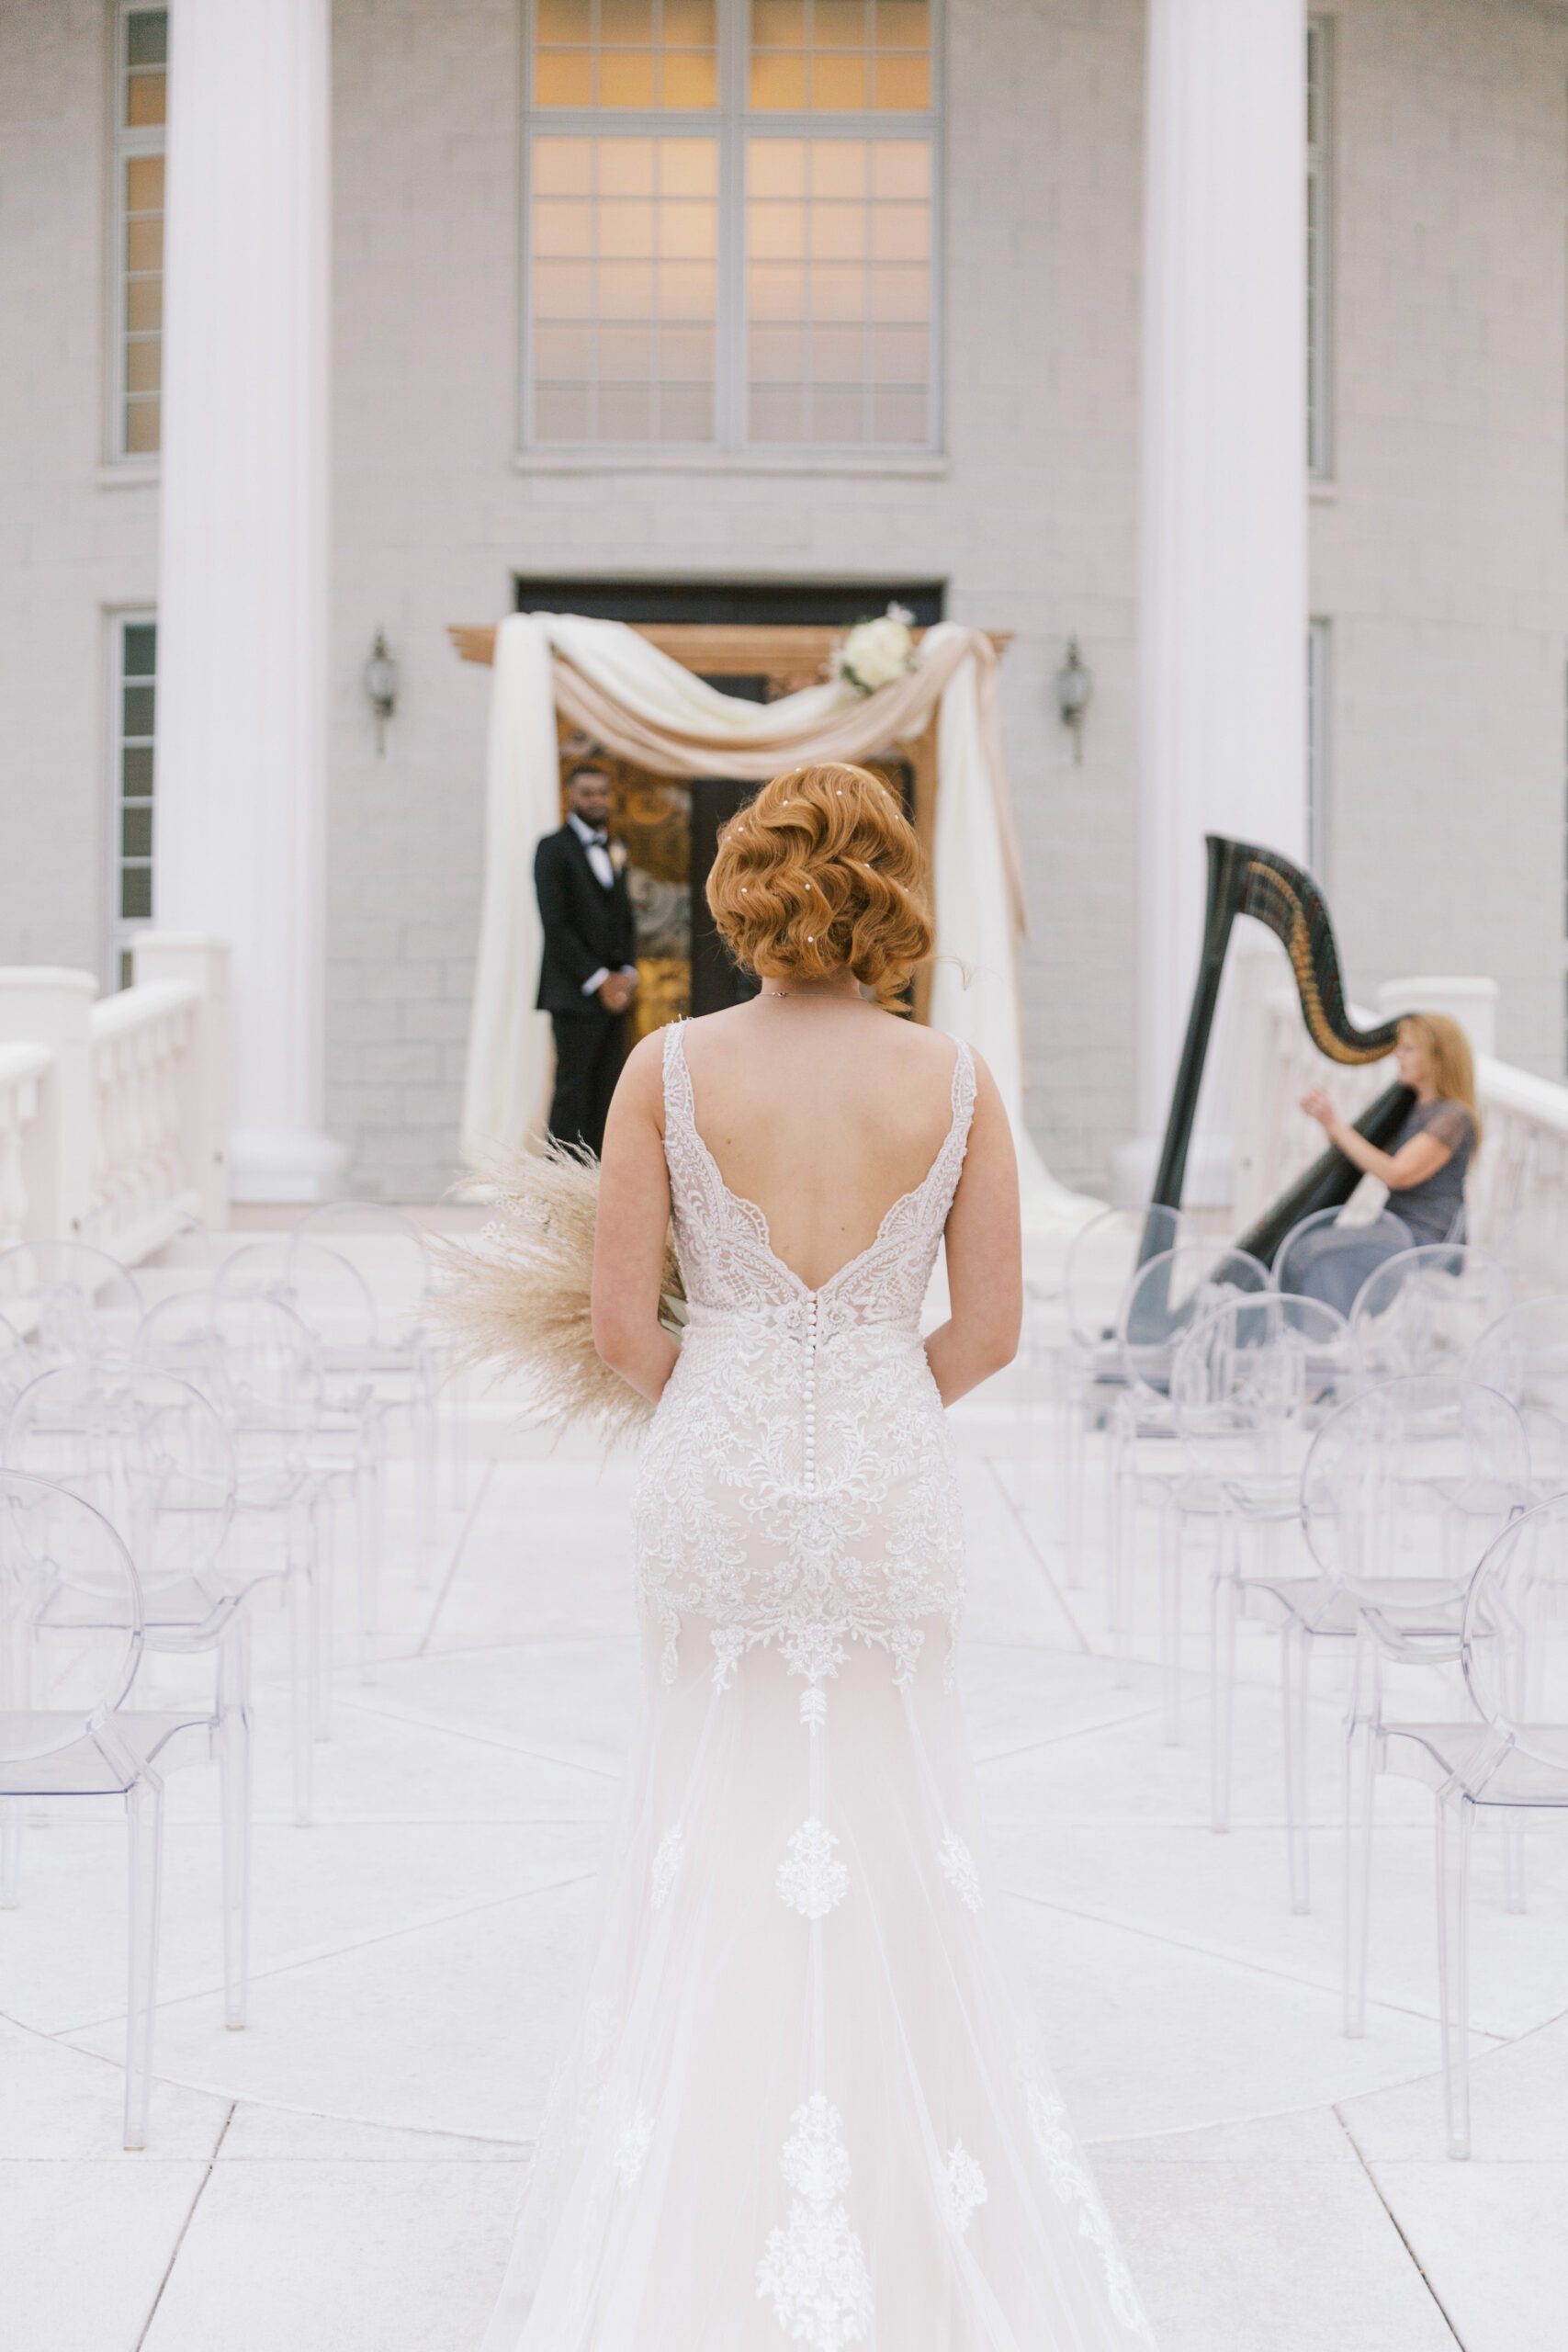 Vintage Old Hollywood Gatsby Inspired Wedding Ceremony with Harpist | Florida Venue The Whitehurst Gallery | Tampa Bay Hair and Makeup Femme Akoi Beauty Studio